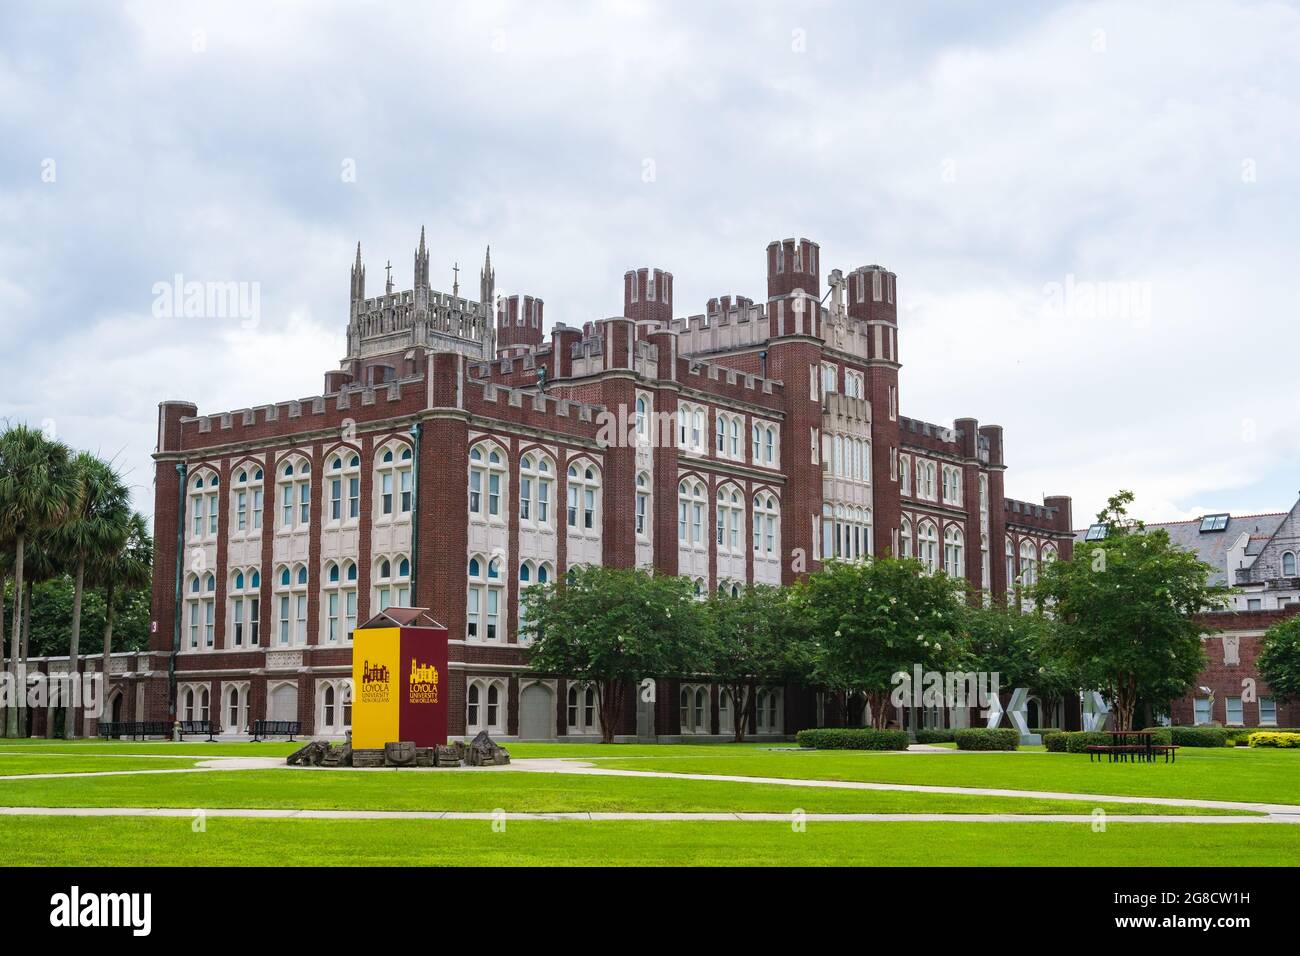 NEW ORLEANS, LA, USA - JULY 17, 2021: Rear view of Loyola University administration building and sign Stock Photo